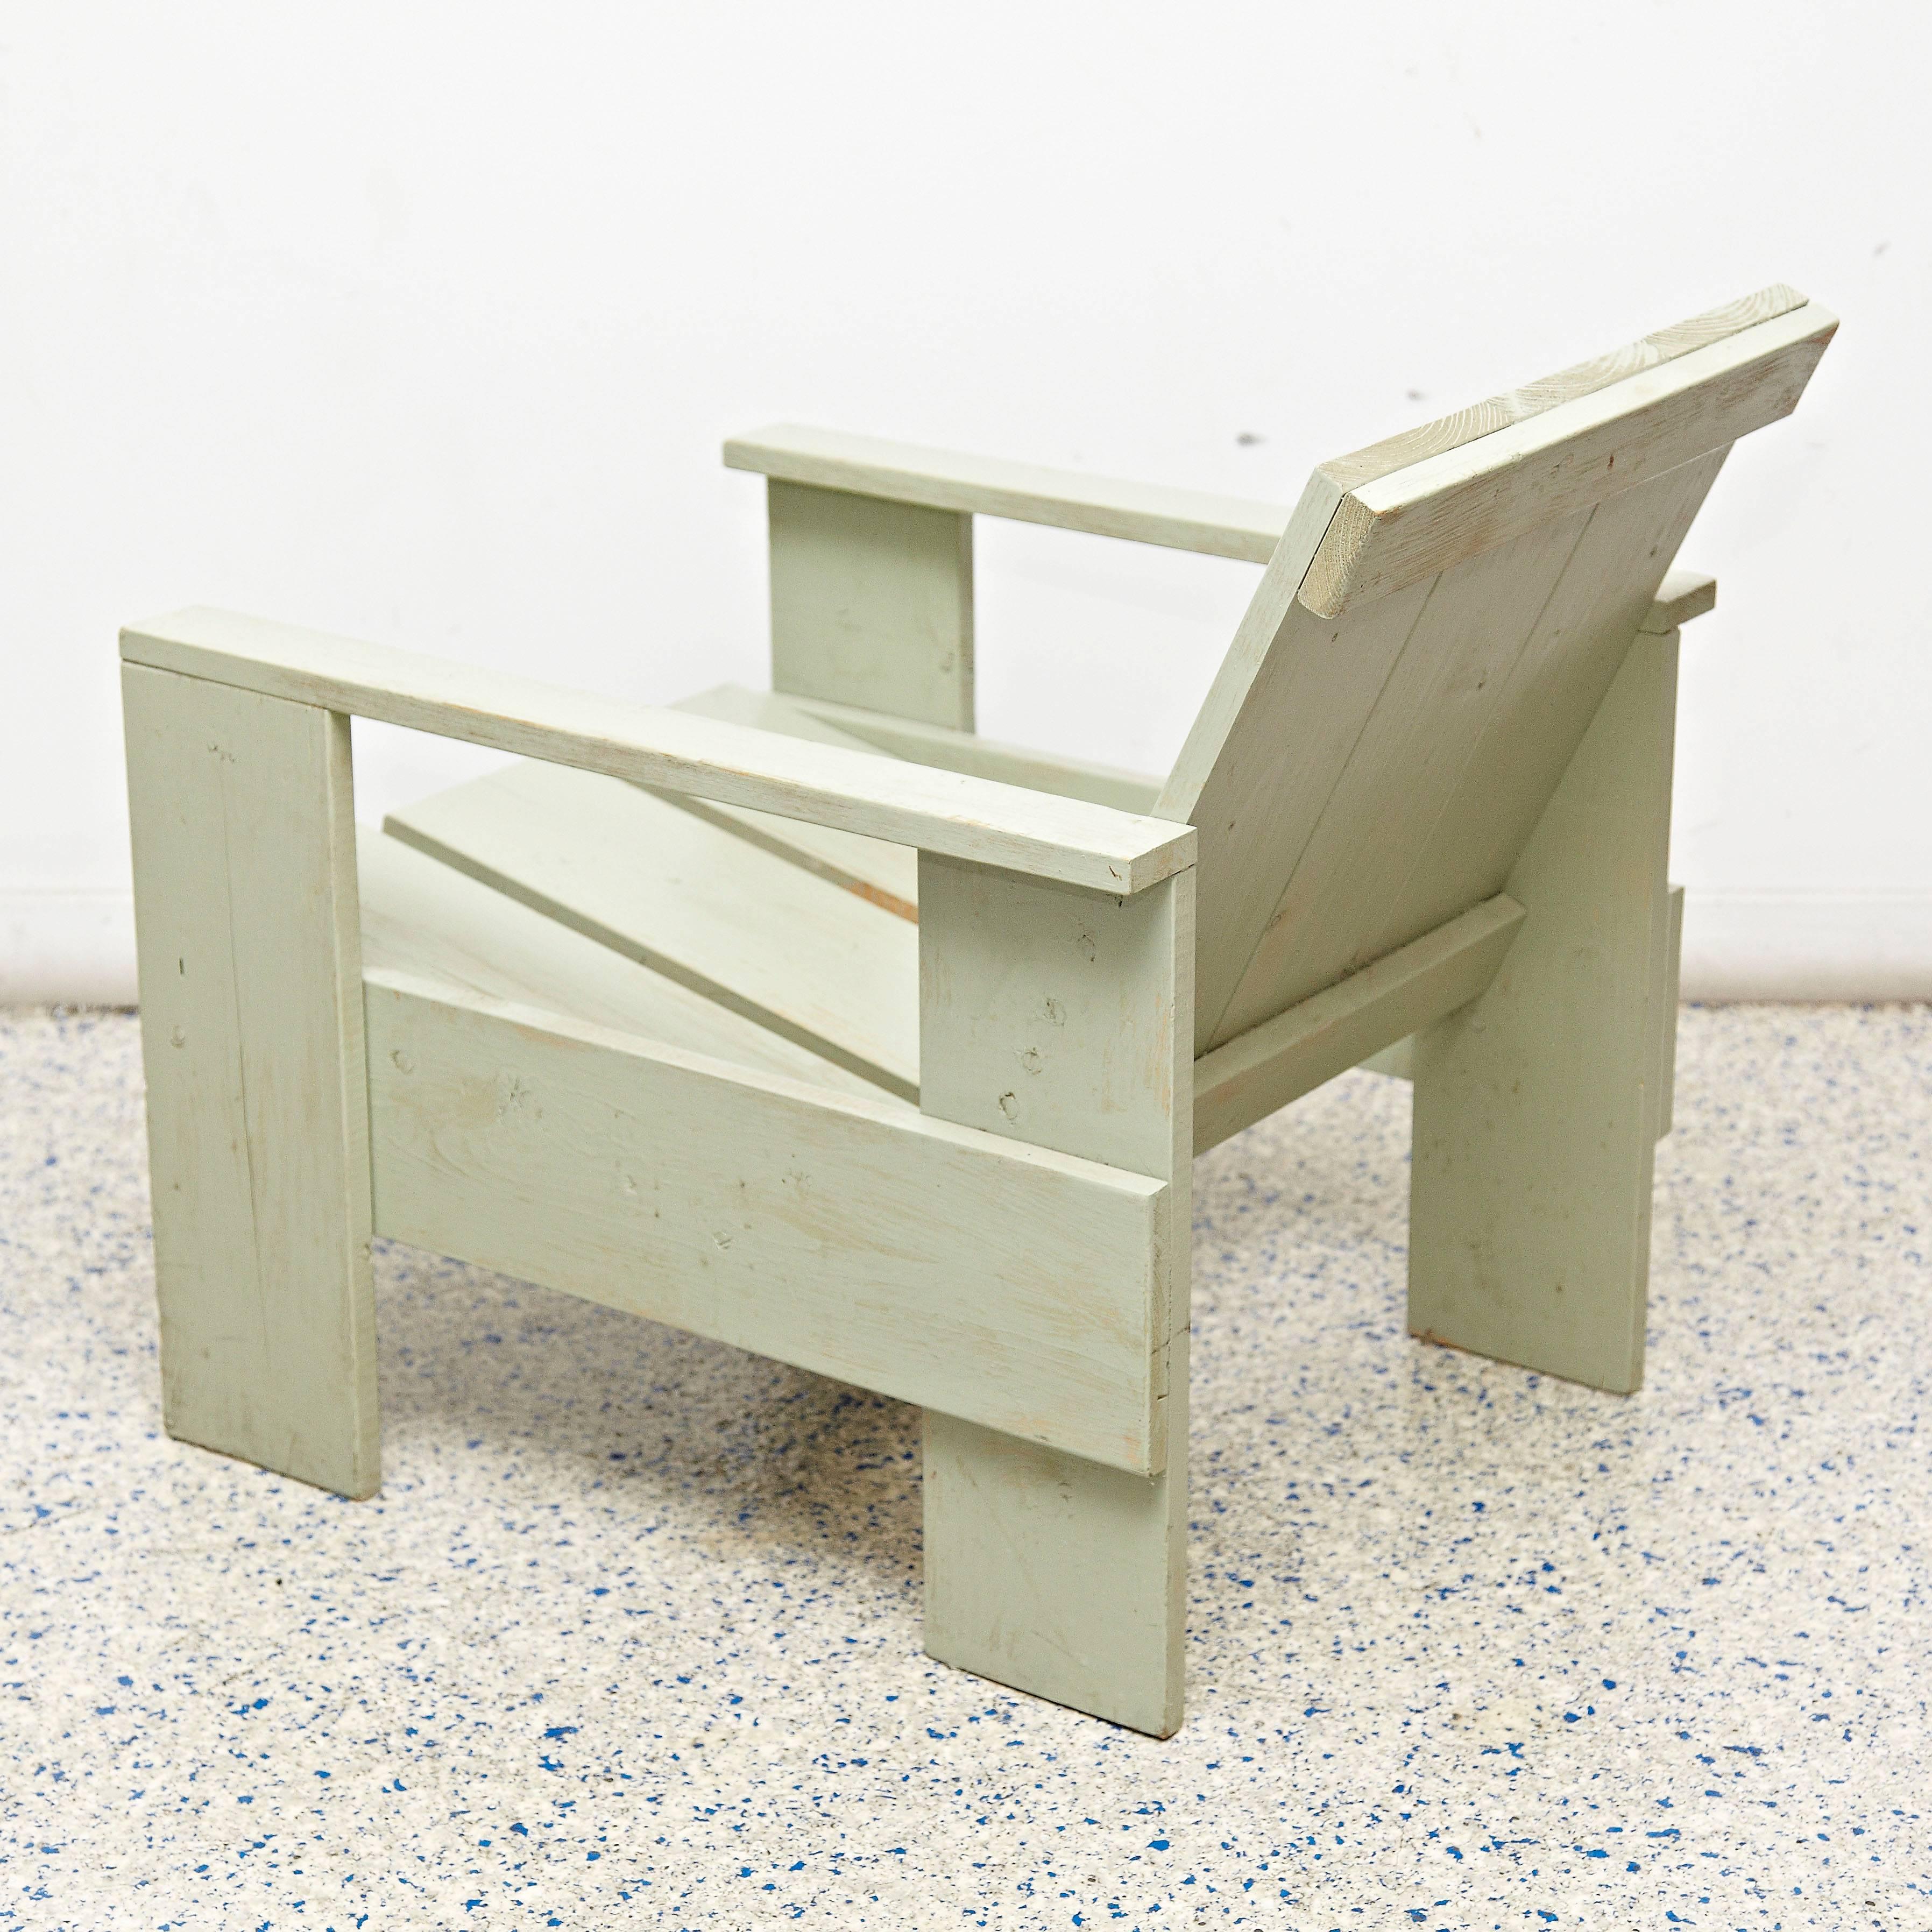 Dutch Crate Chair in the Manner of Gerrit Rietveld, circa 1950